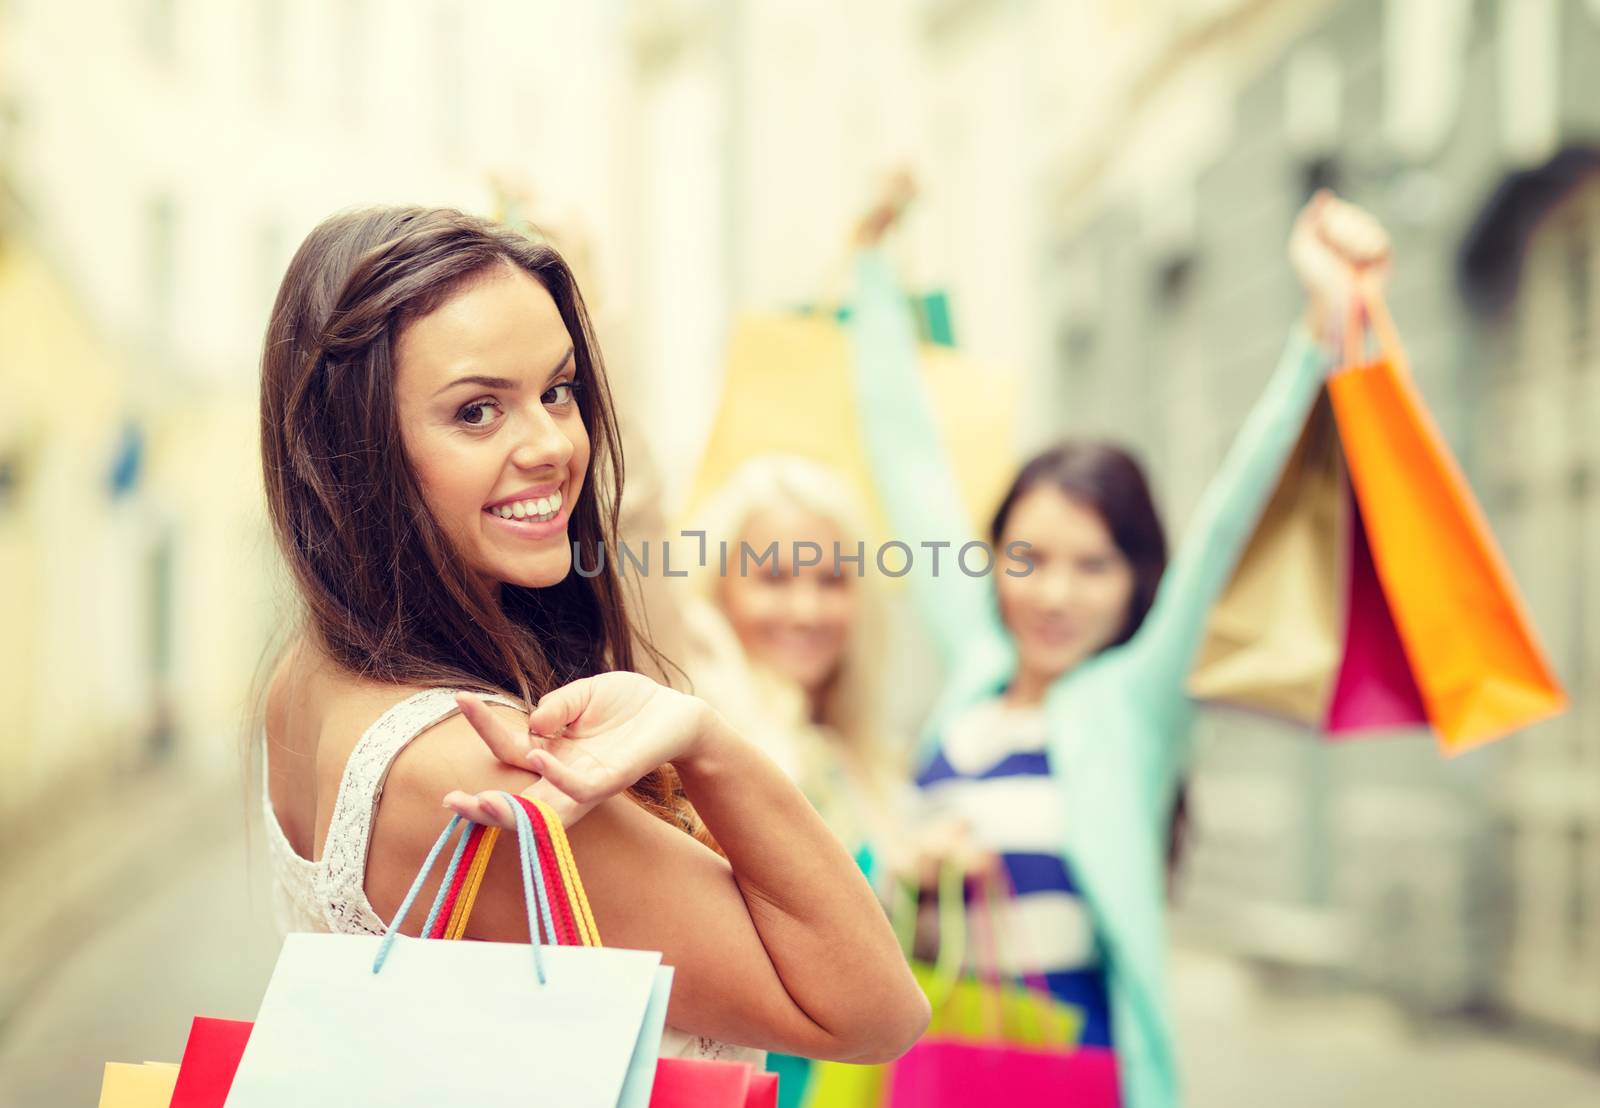 beautiful woman with shopping bags in the ctiy by dolgachov